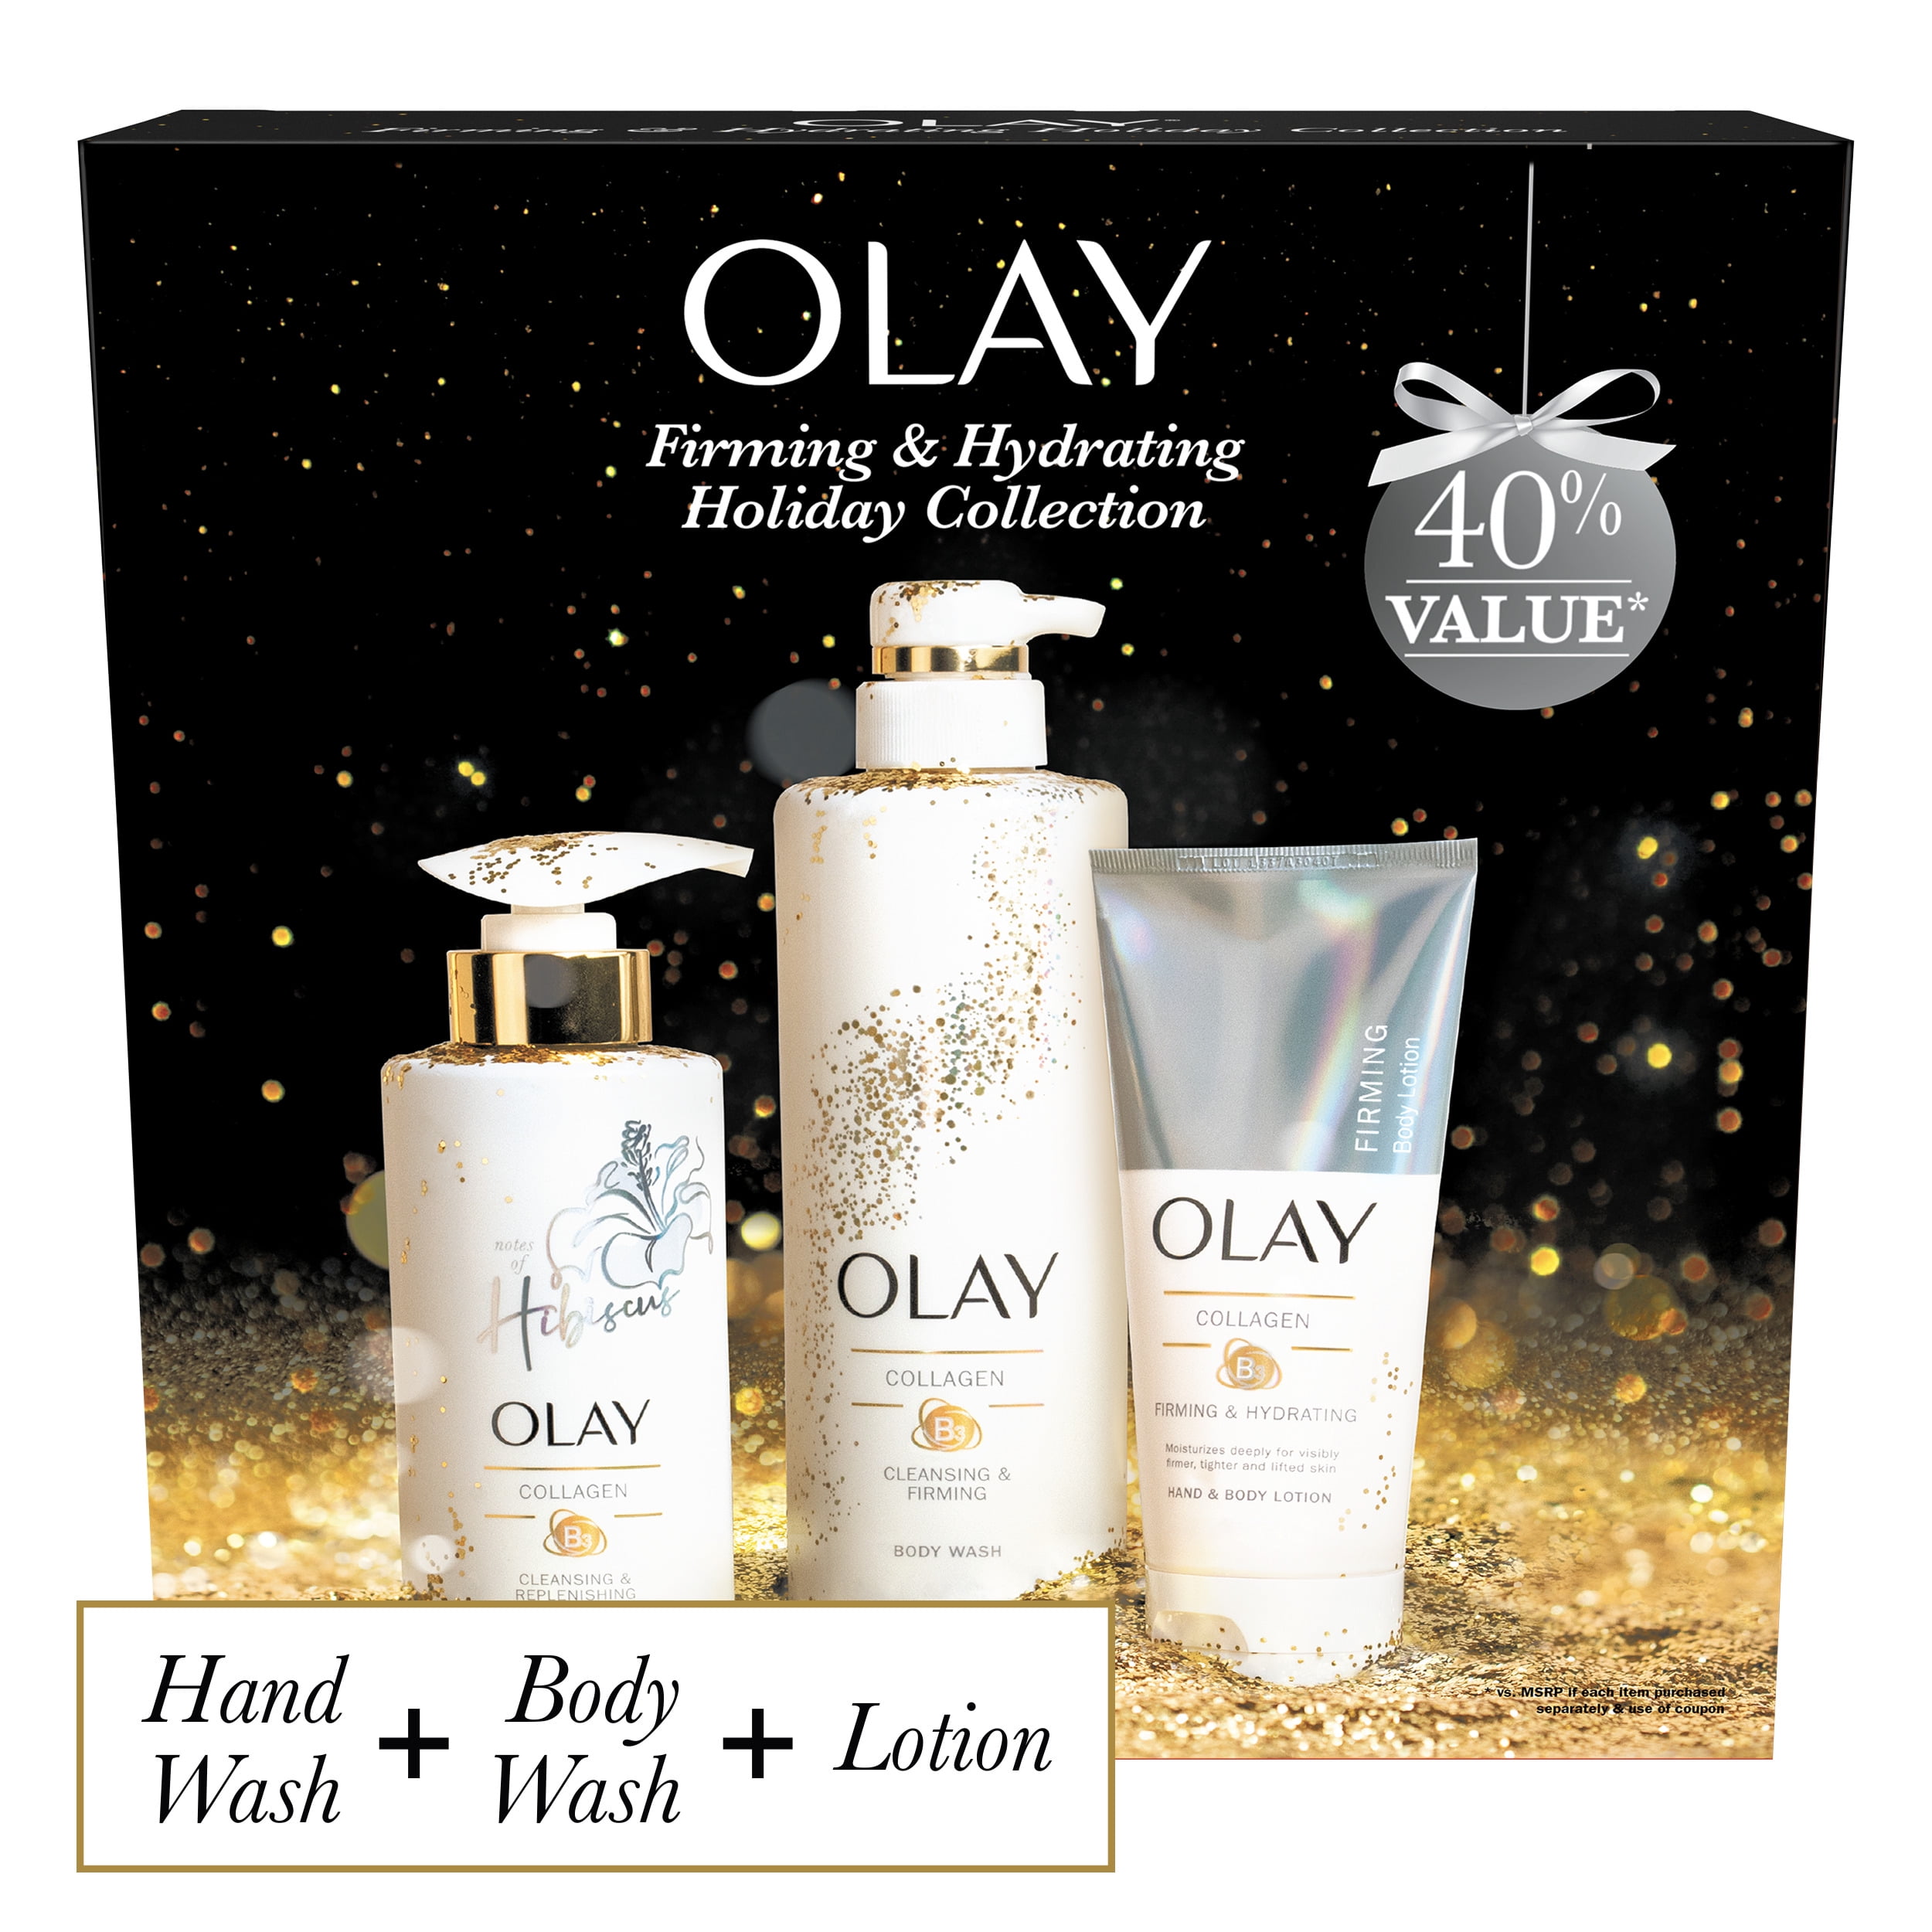  40 Value Olay Holiday Gift Set With Collagen Body Wash 17 9 Oz 